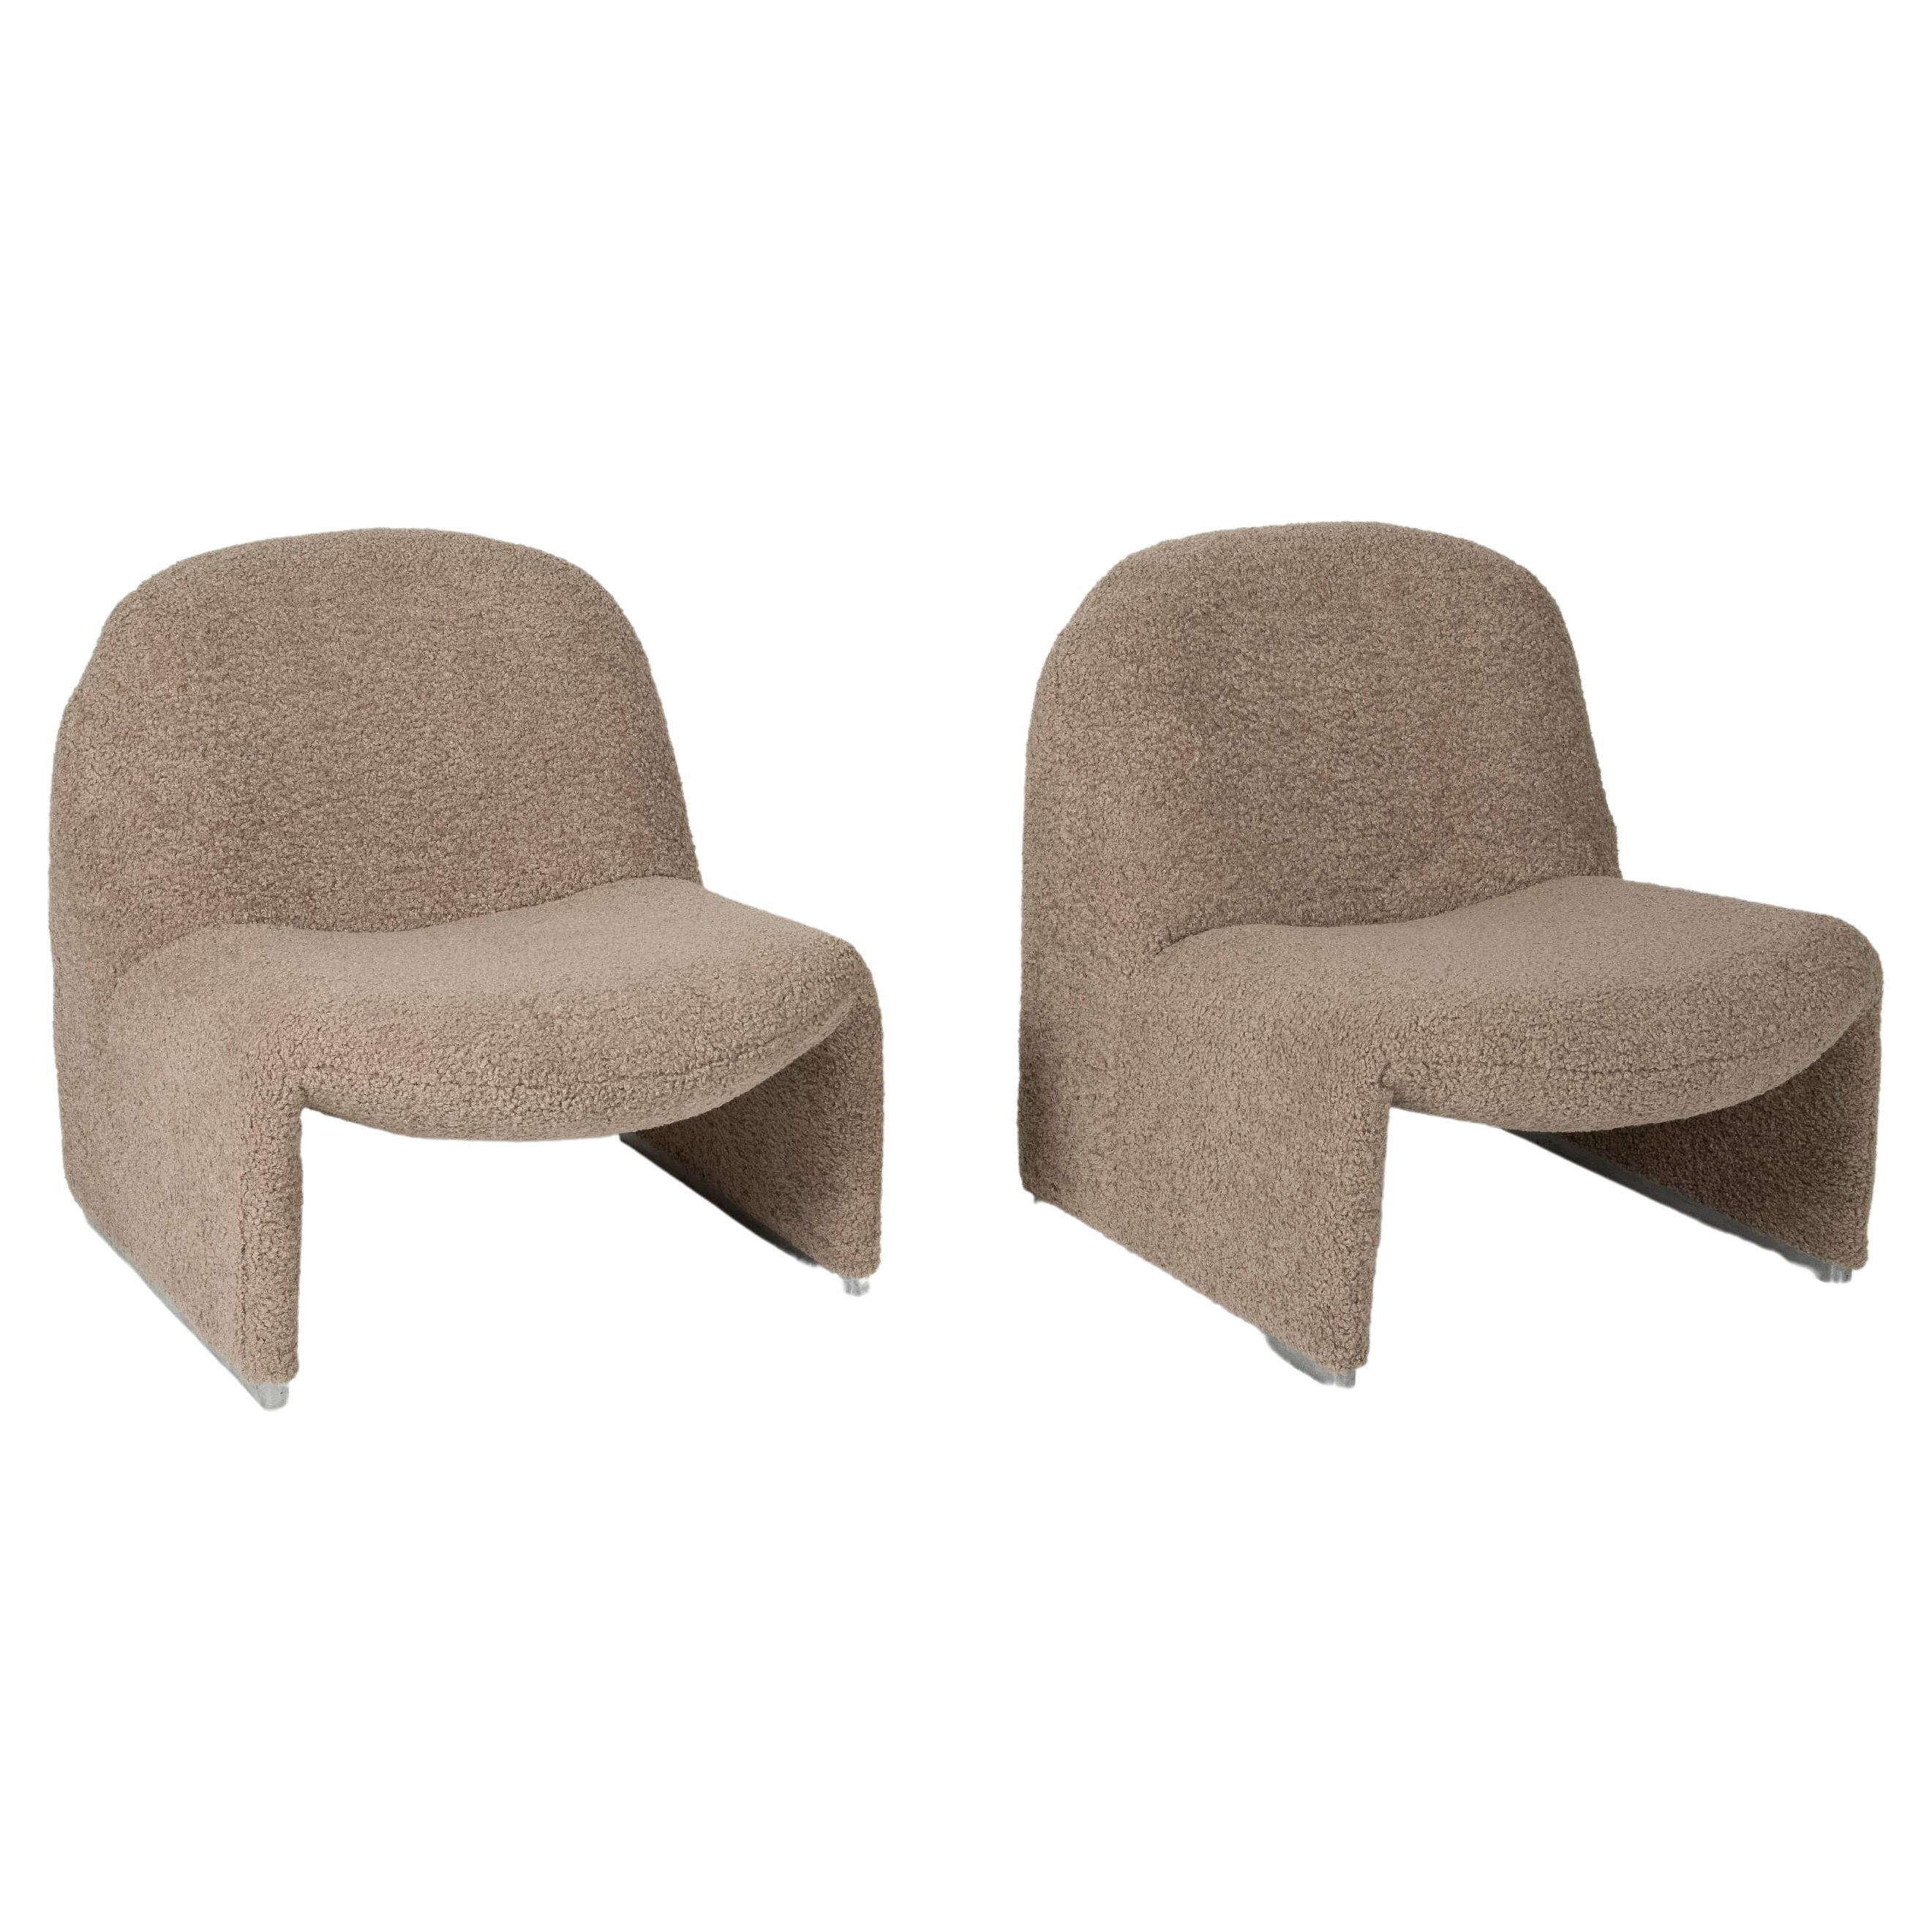 Pair of Alky Armchairs by Giancarlo Piretti for Artifort, 1970s